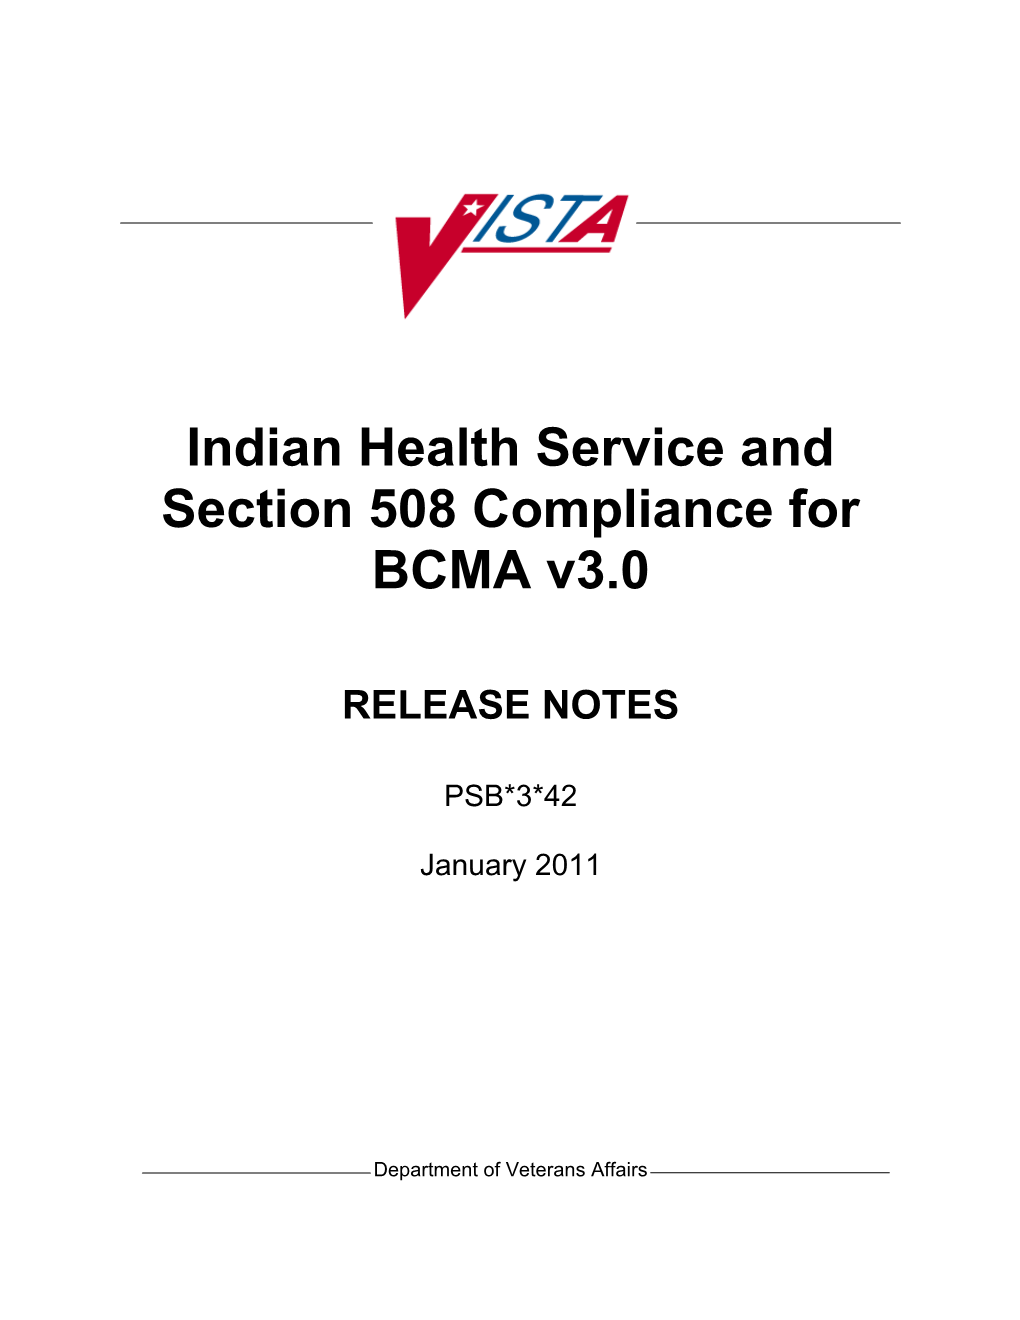 Indian Health Service and Section 508 Compliance for BCMA V3.0